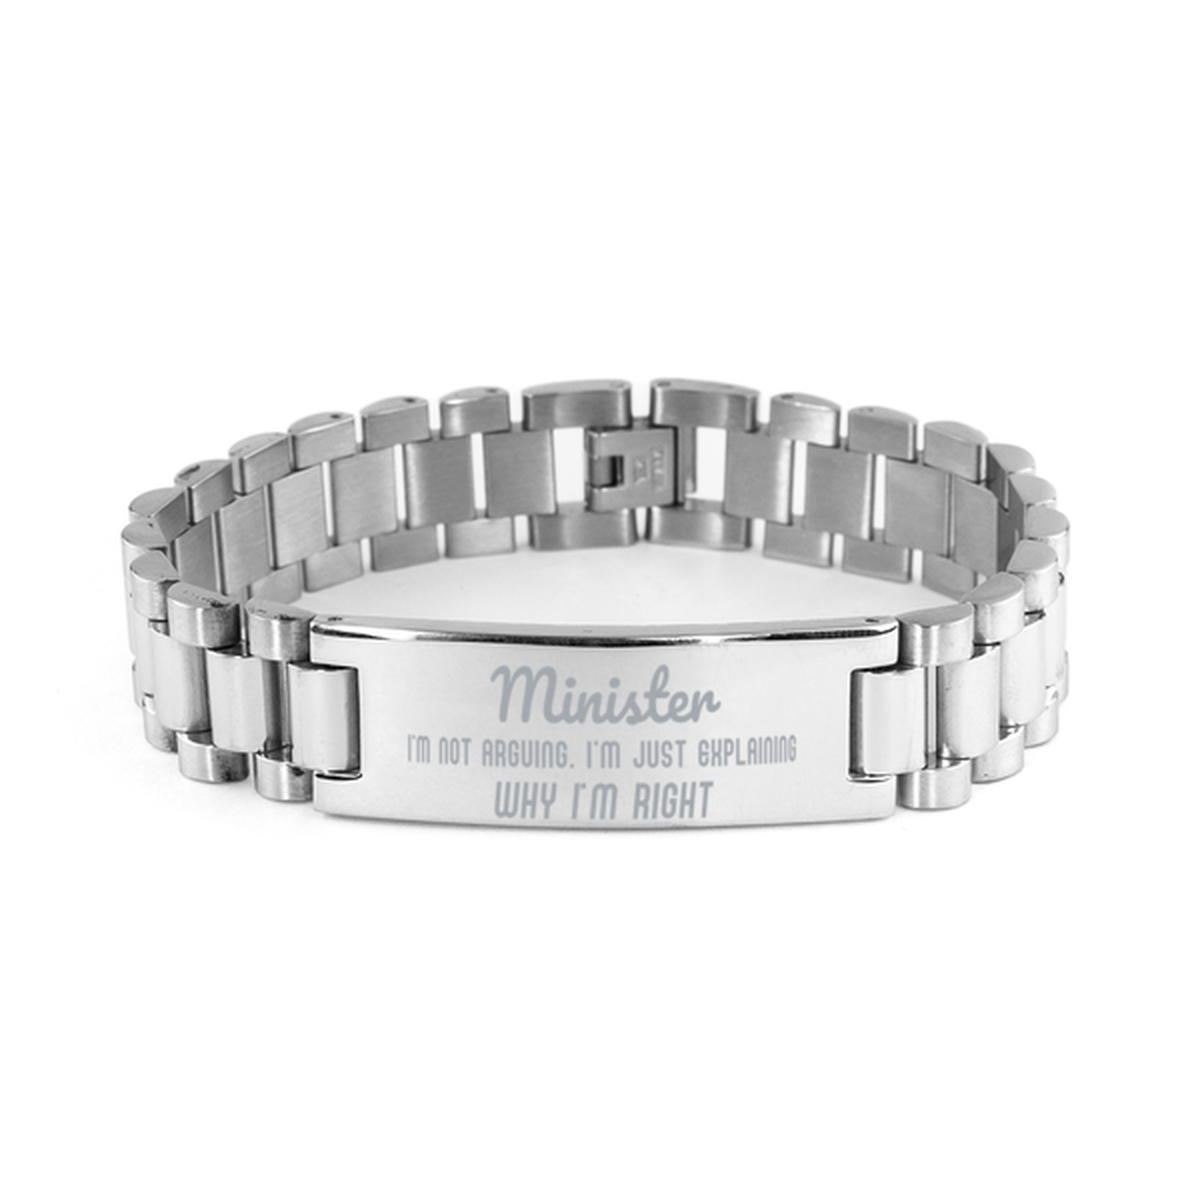 Minister I'm not Arguing. I'm Just Explaining Why I'm RIGHT Ladder Stainless Steel Bracelet, Graduation Birthday Christmas Minister Gifts For Minister Funny Saying Quote Present for Men Women Coworker